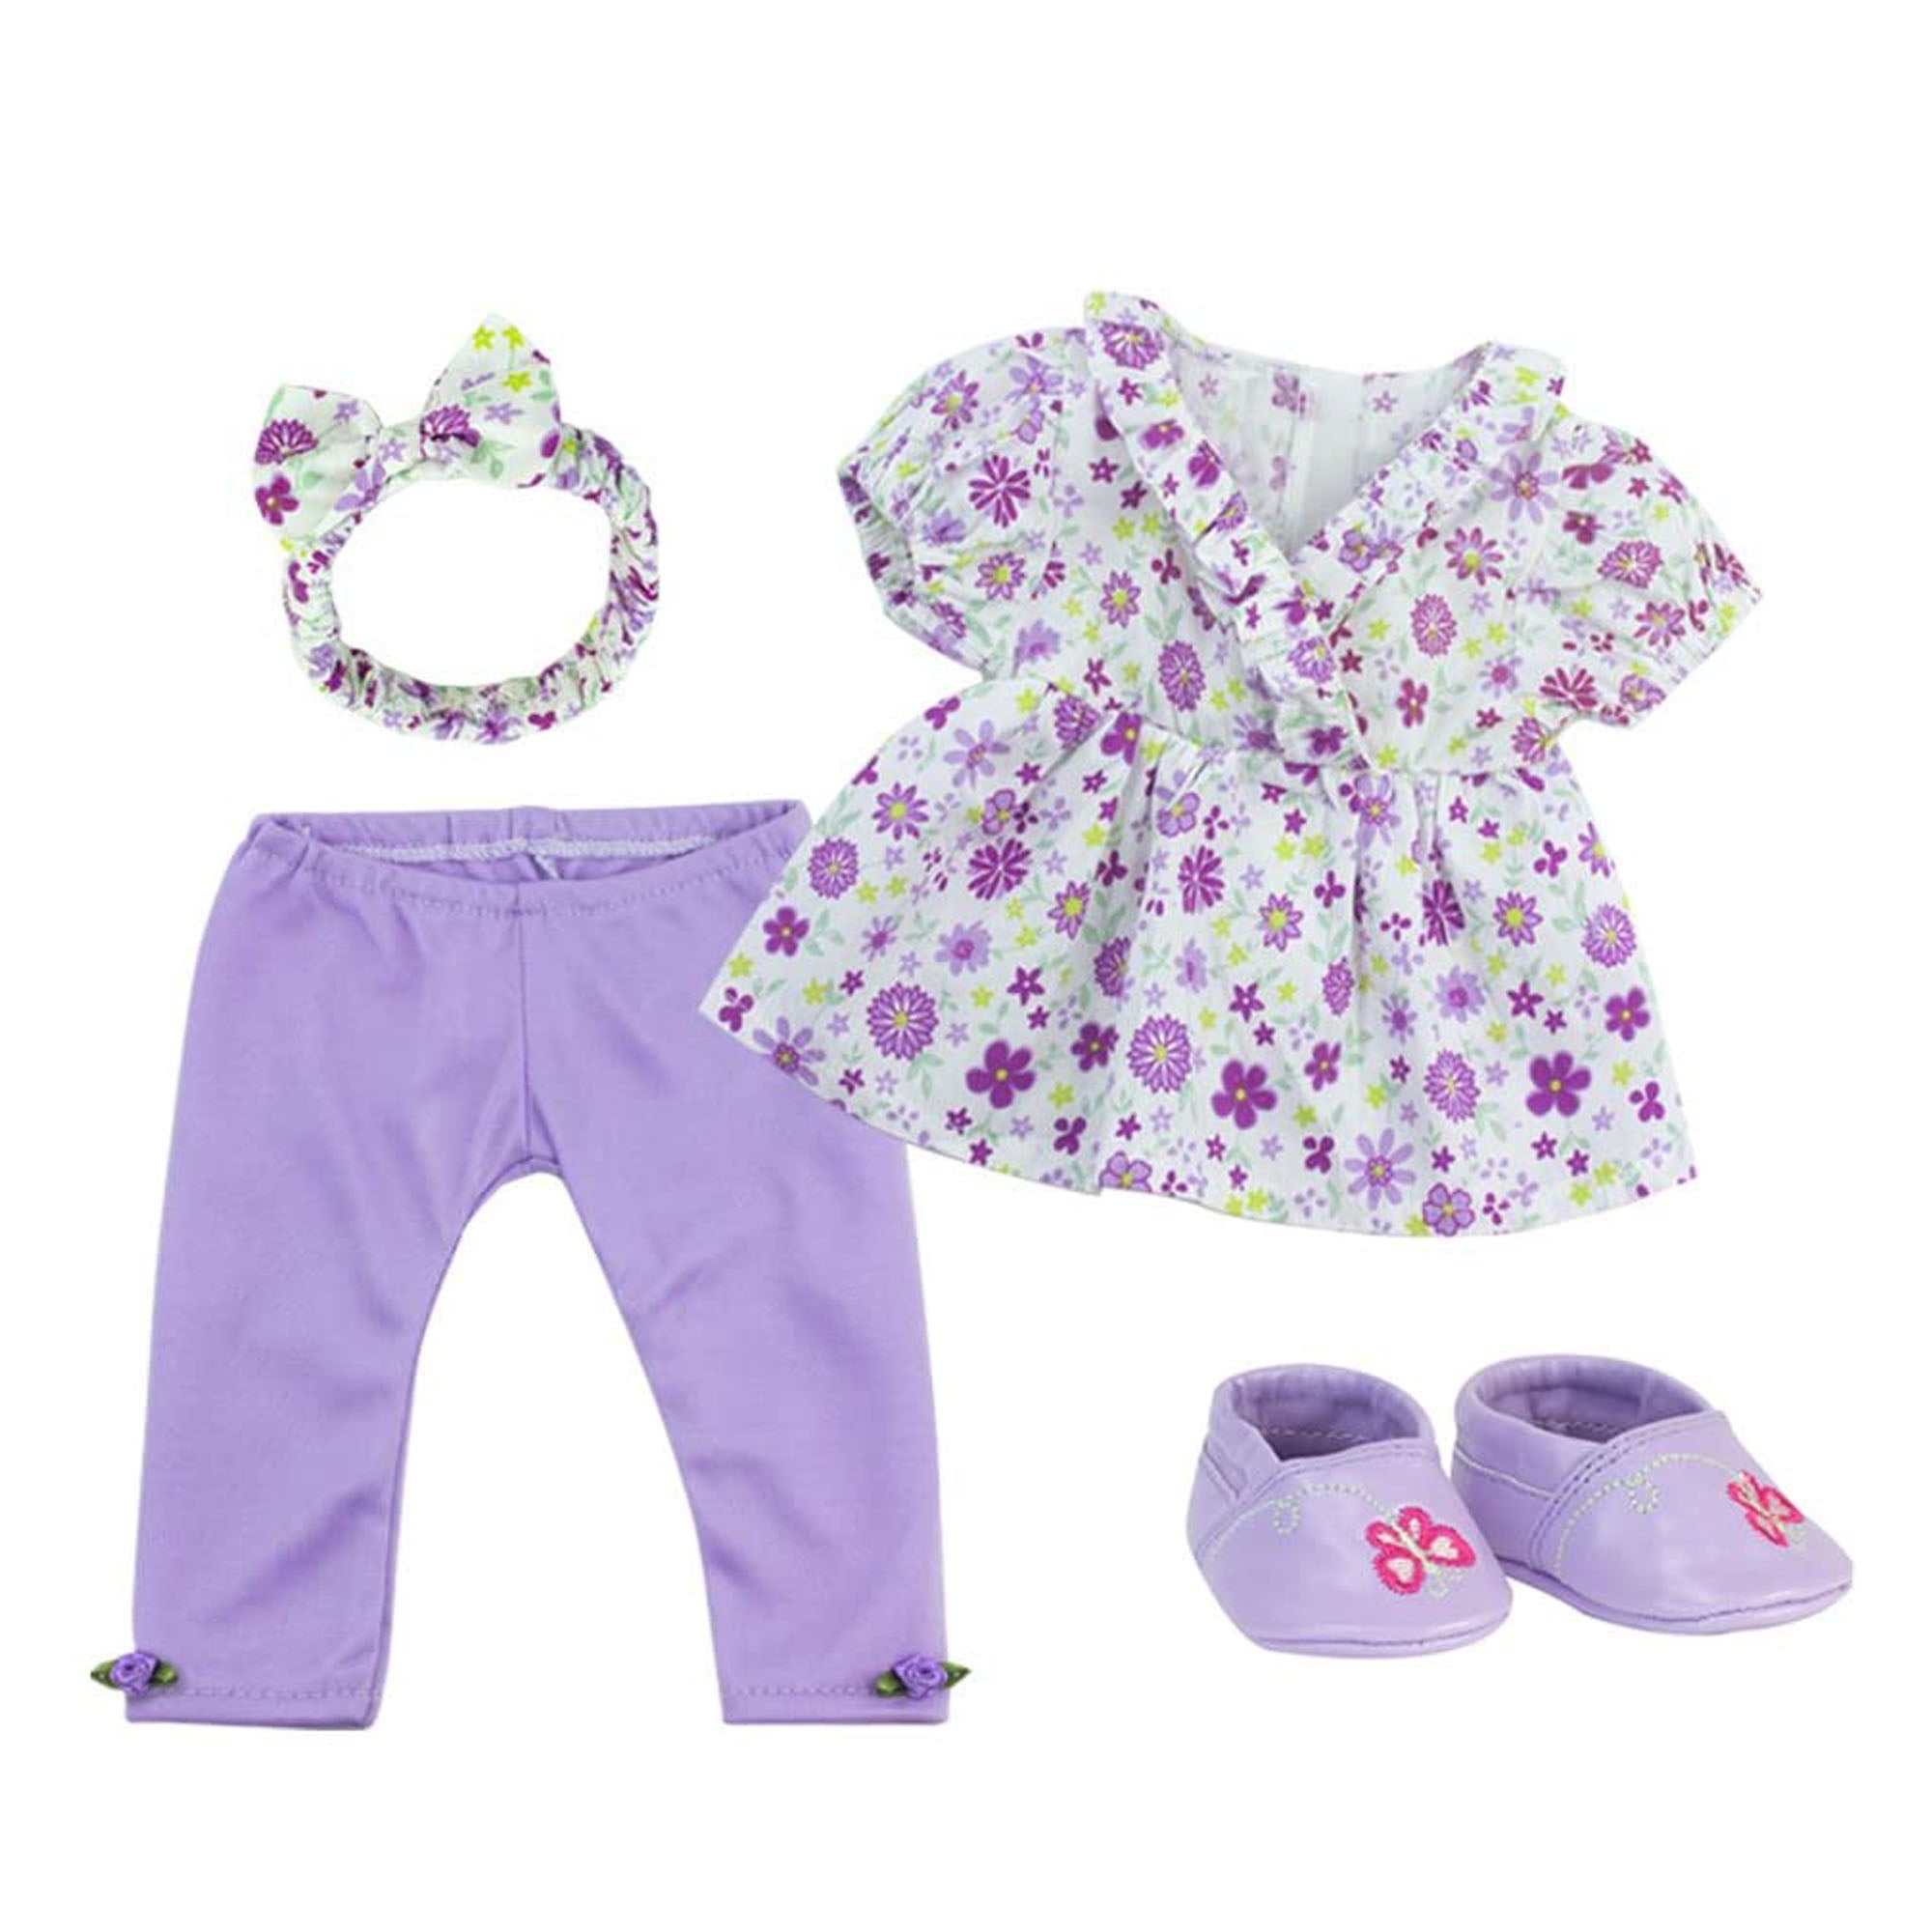 Sophia’s 8 Pc Set Outfit, Headband and Shoes for Two 15" Dolls